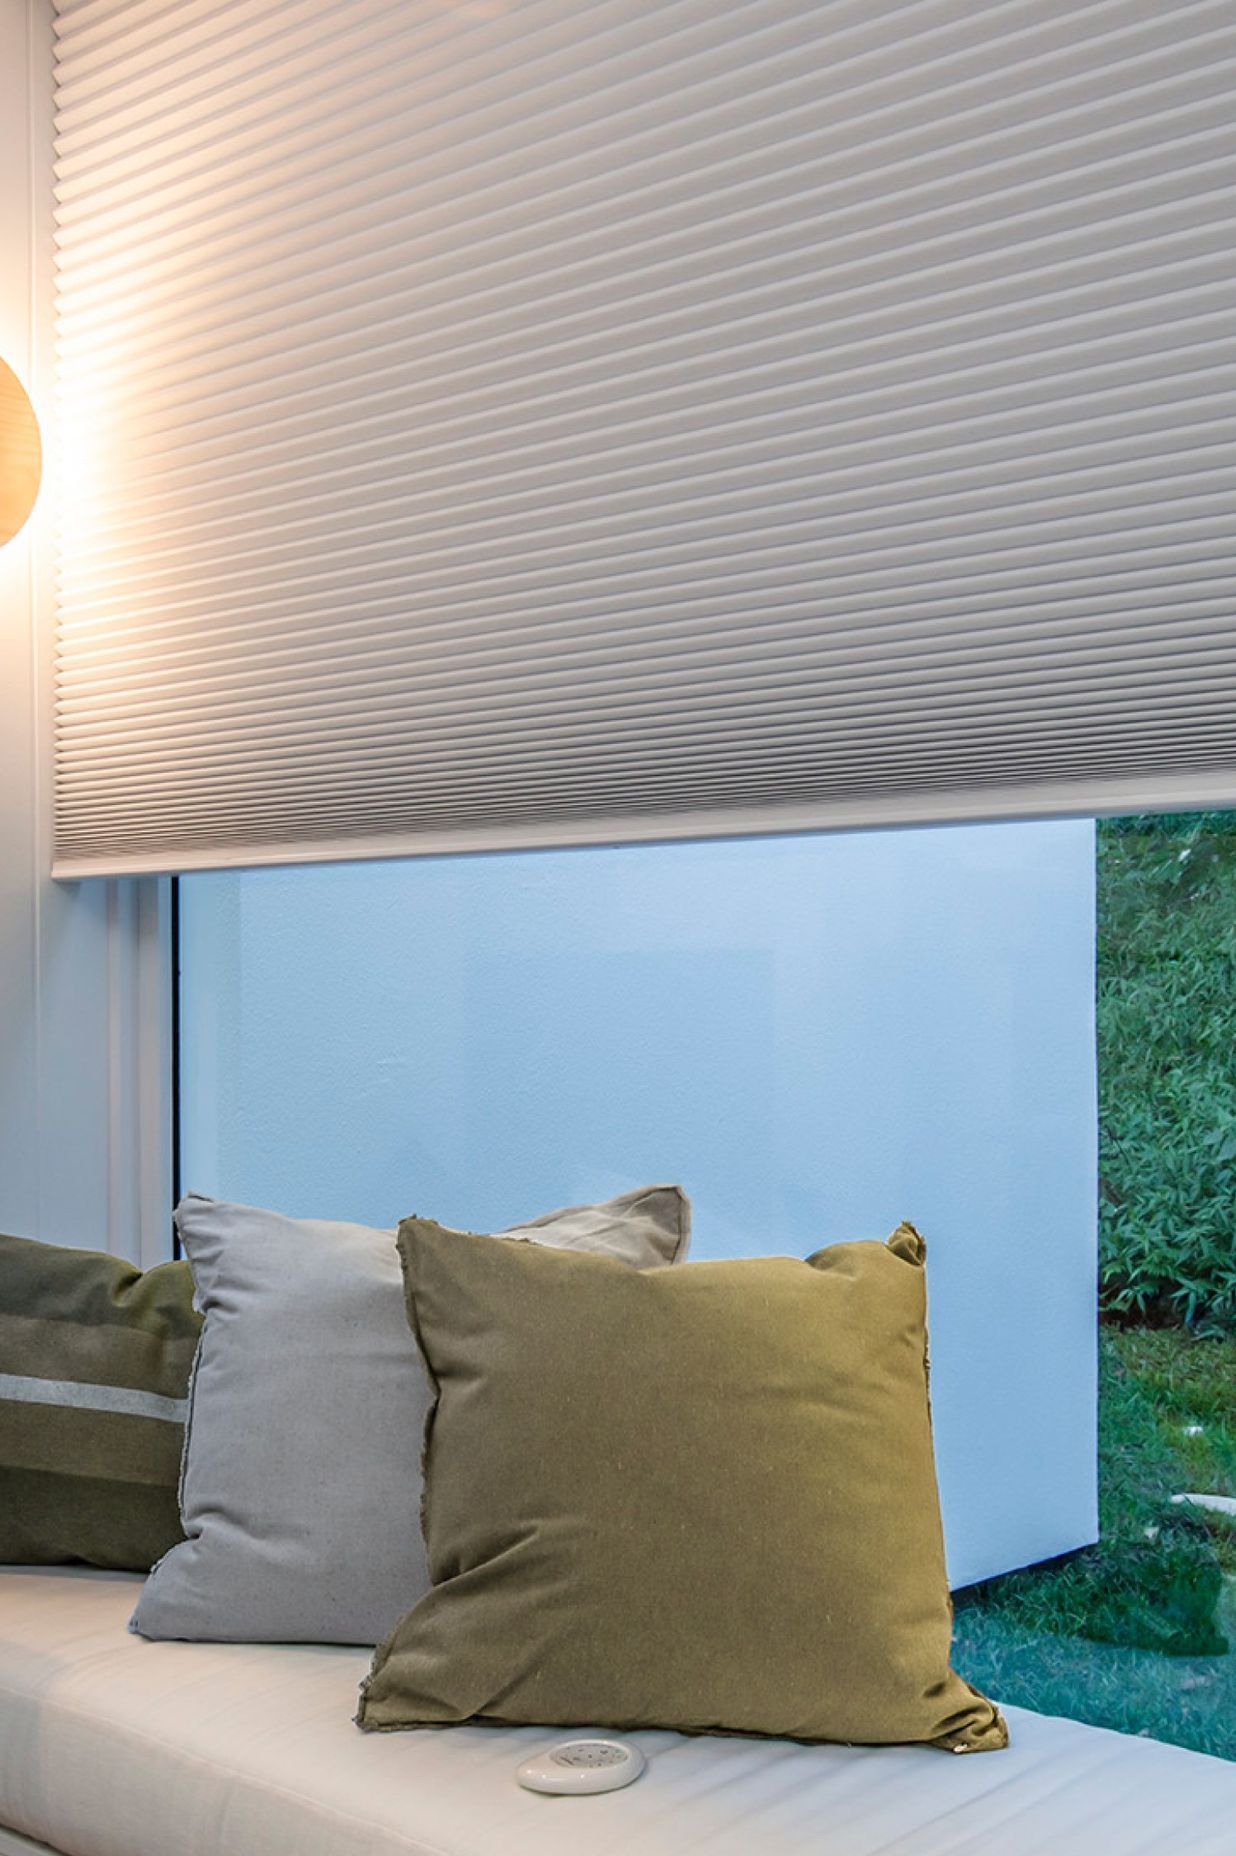 Image credit: Luxaflex® Duette® shade